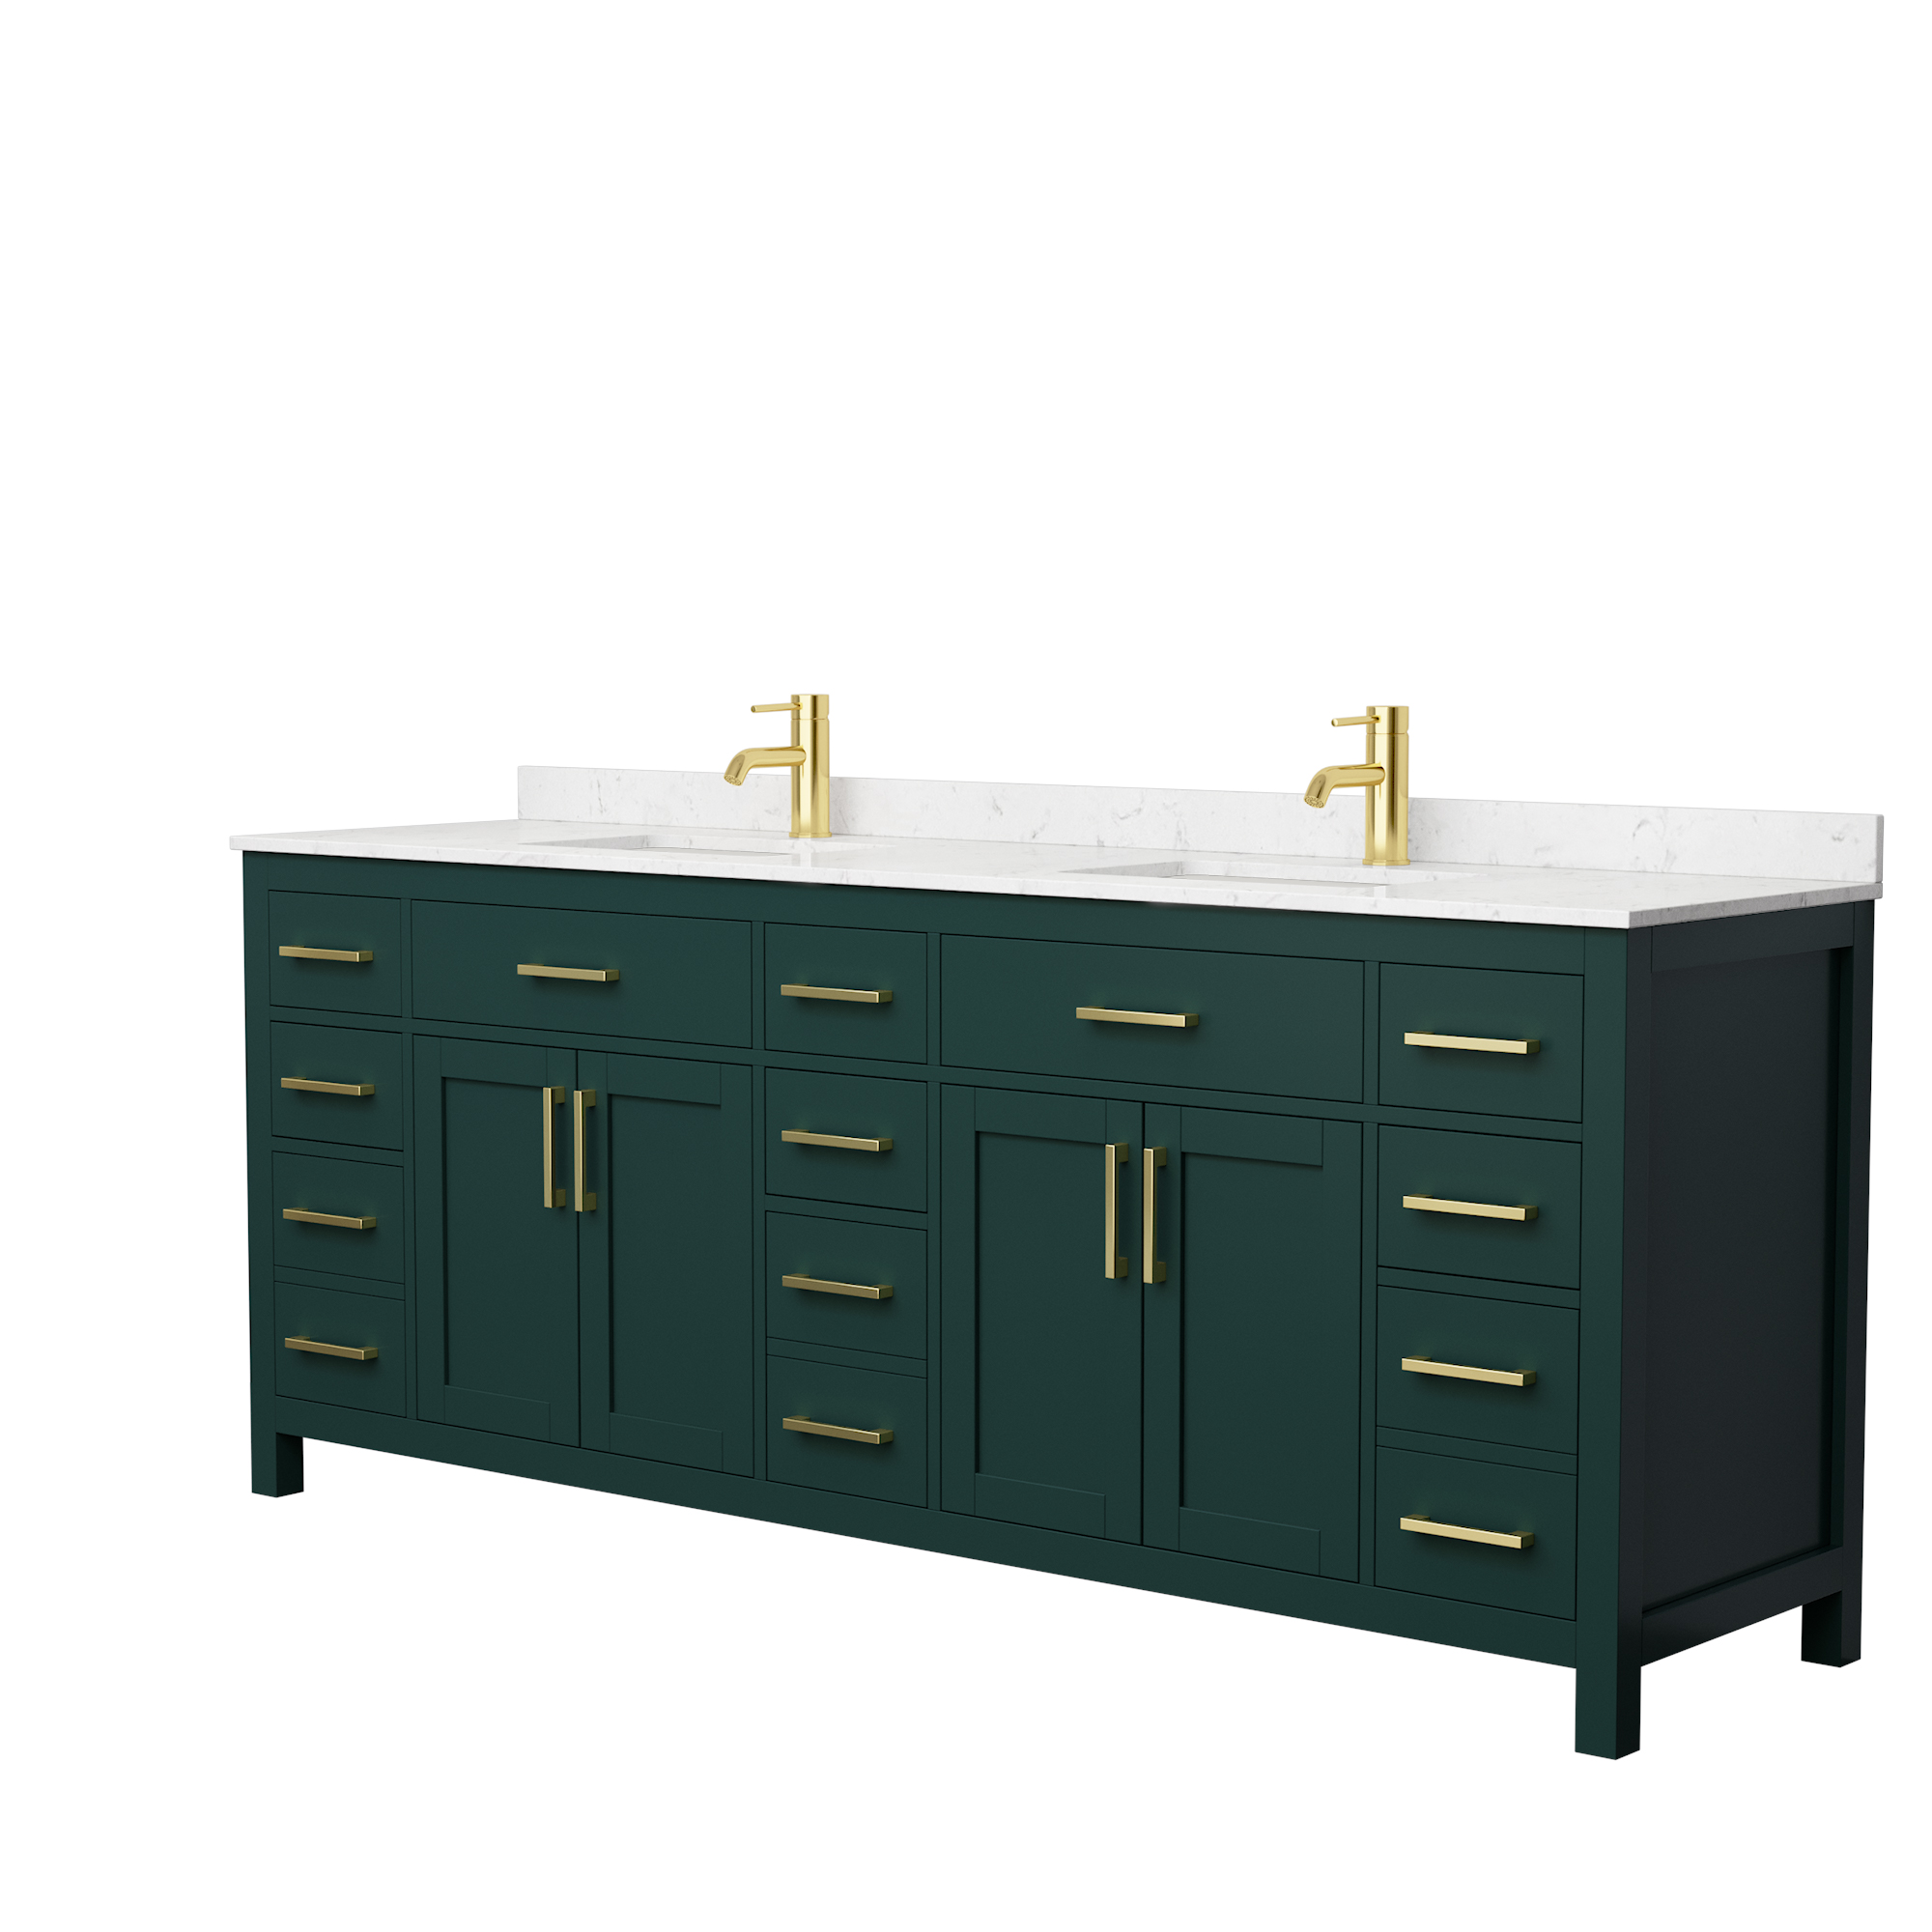 84" Double Bathroom Vanity in Green, Carrara Cultured Marble Countertop, Undermount Square Sinks, Brushed Gold Trim